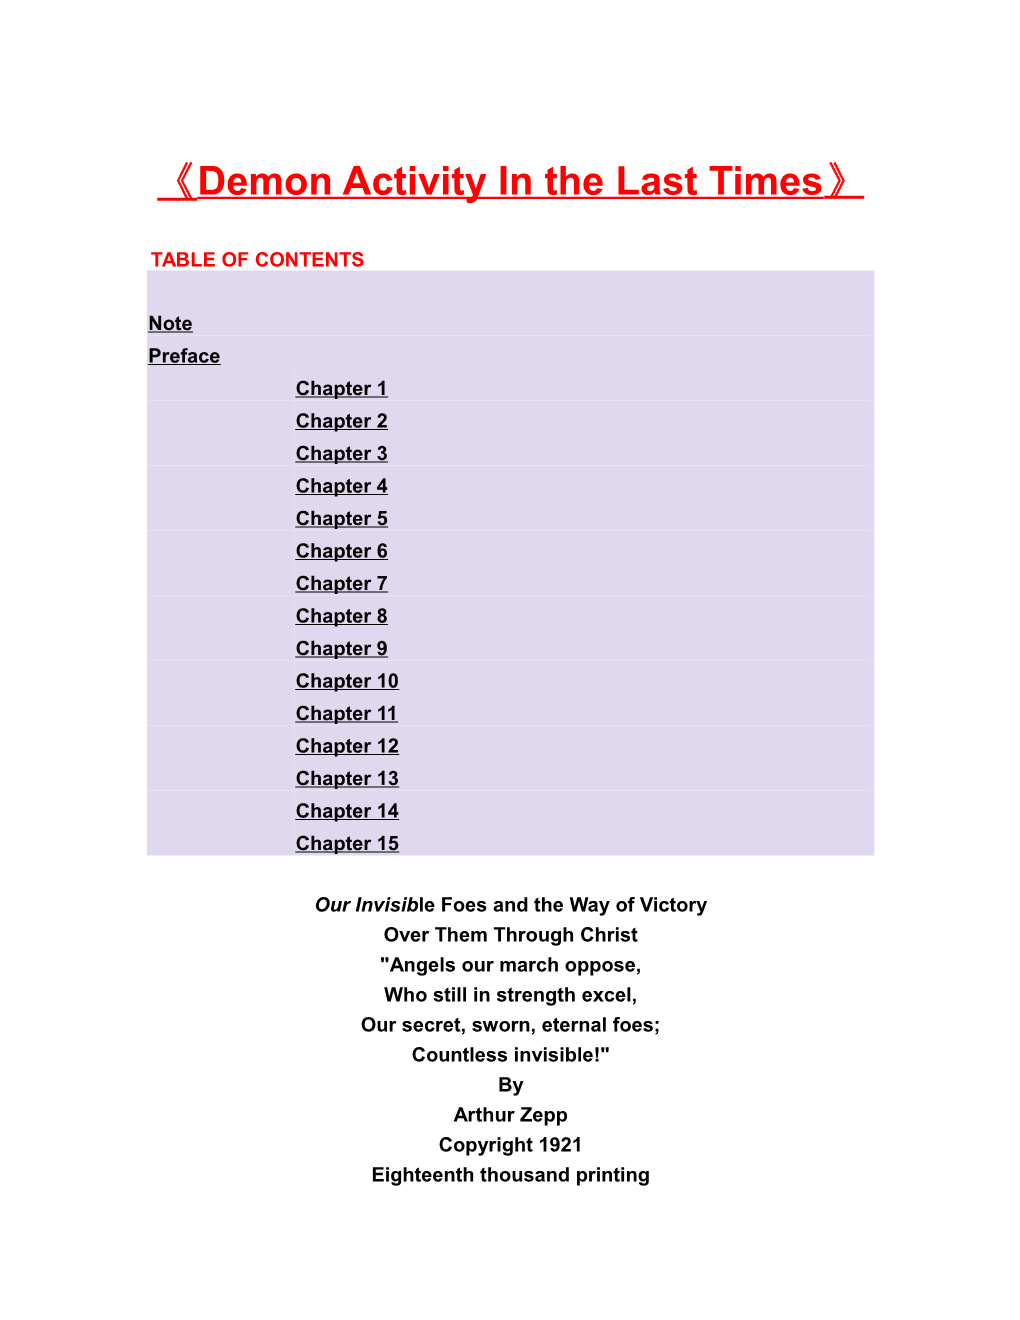 Demon Activity in the Last Times